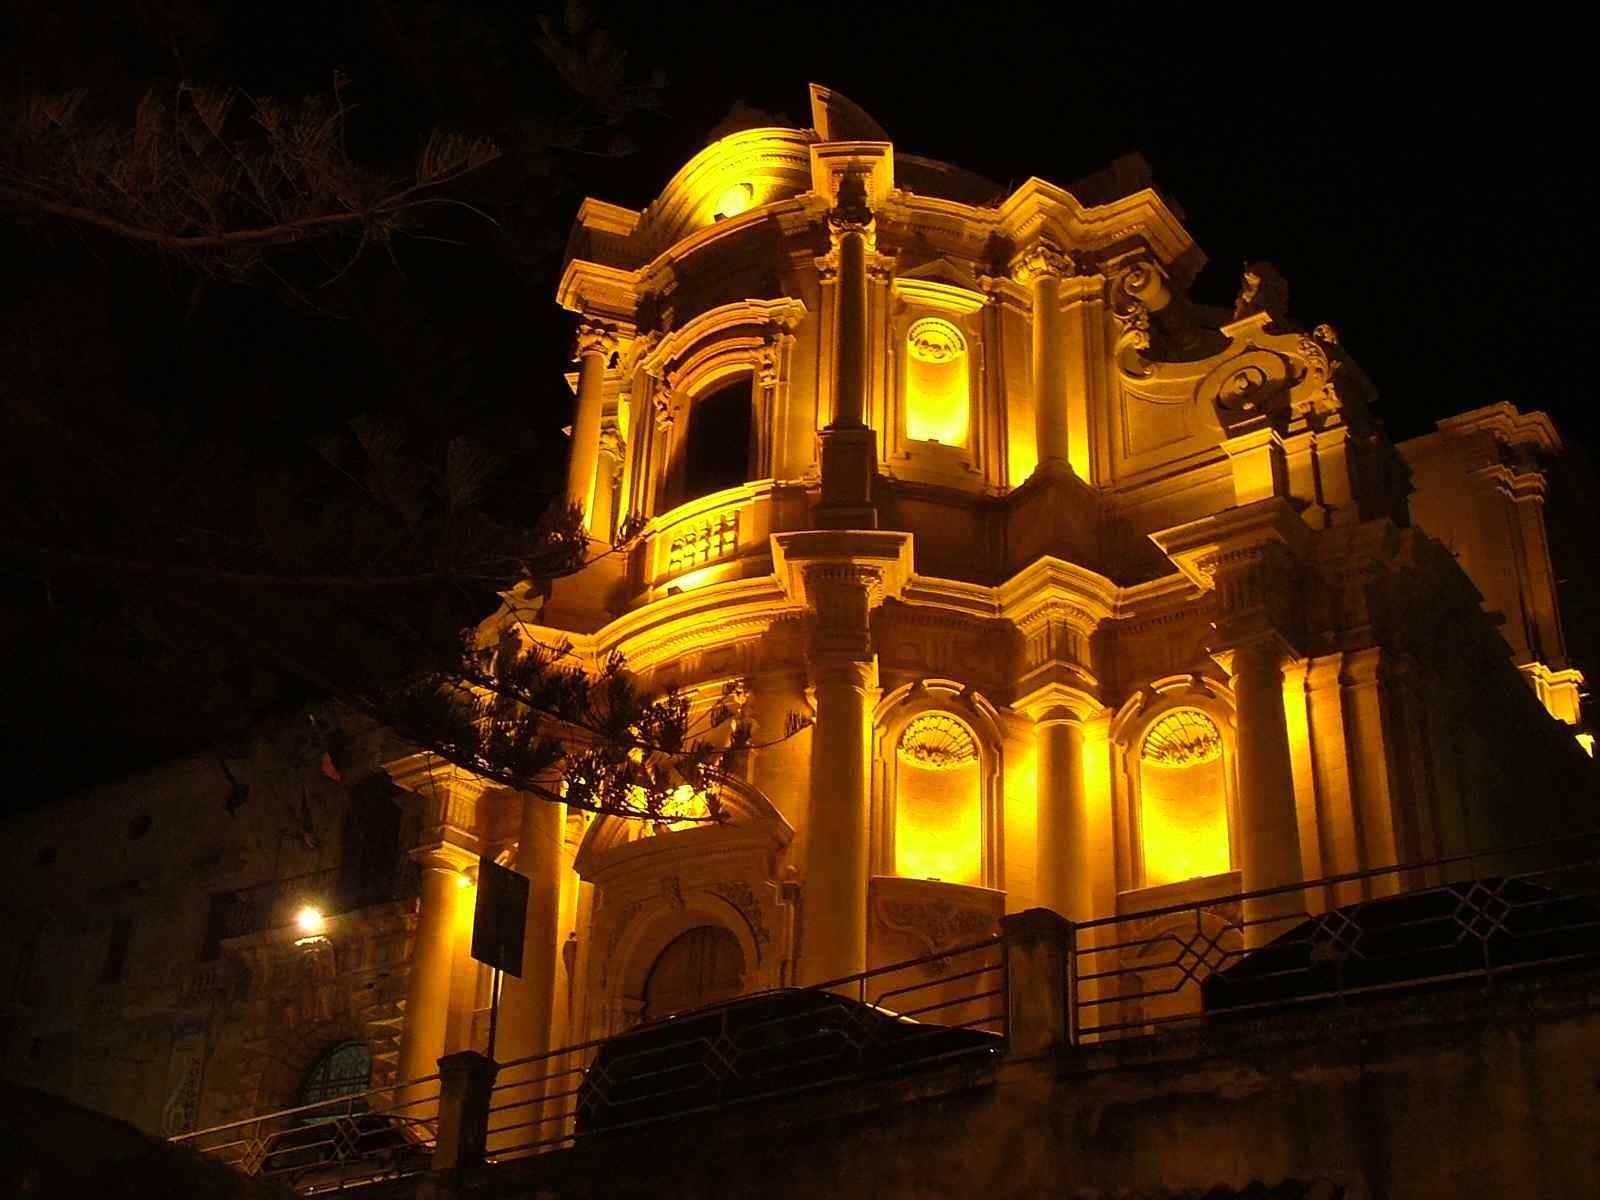 an old building is illuminated at night with street lights